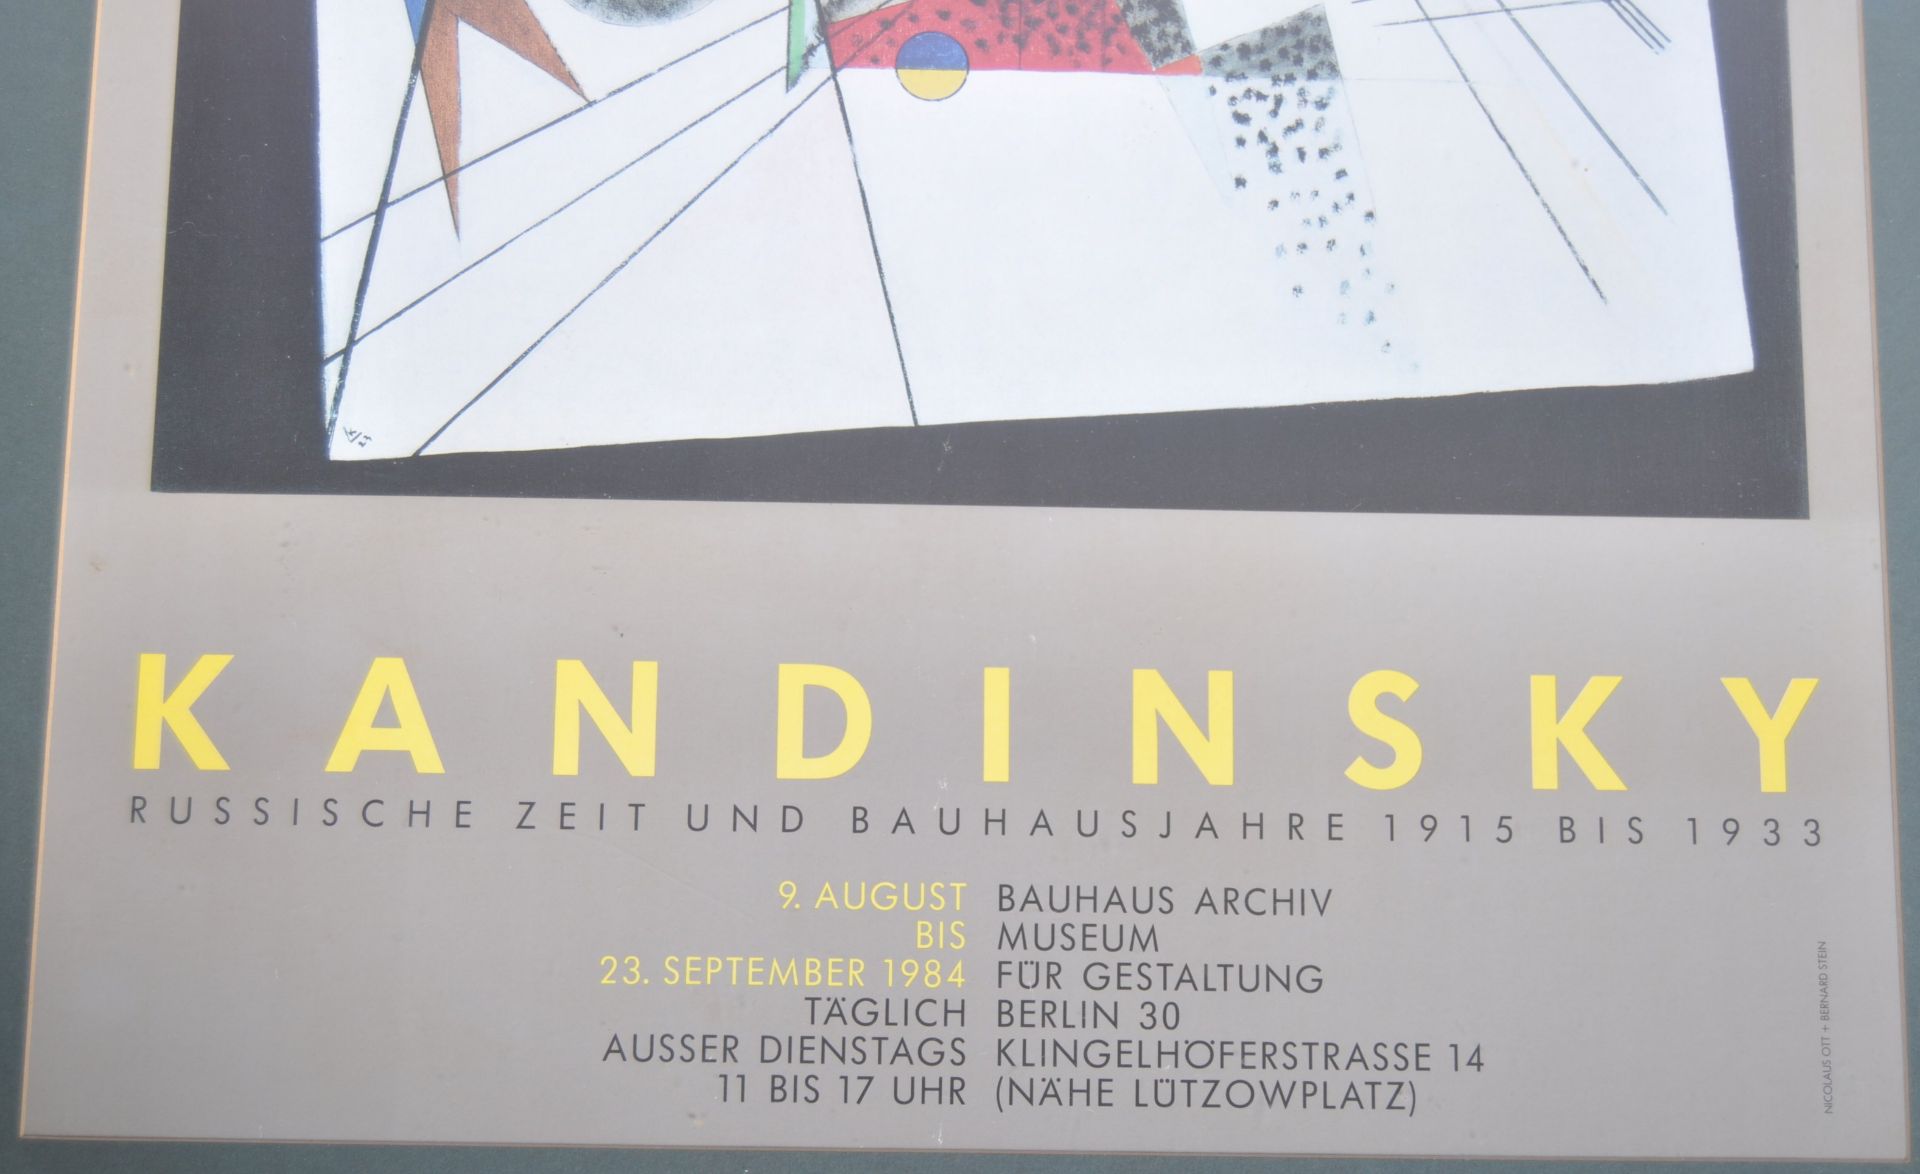 KANDINSKY 1980'S MUSEUM EXHIBITION POSTER FOR BAUHAUS ARCHIV MUSEUM - Image 4 of 5